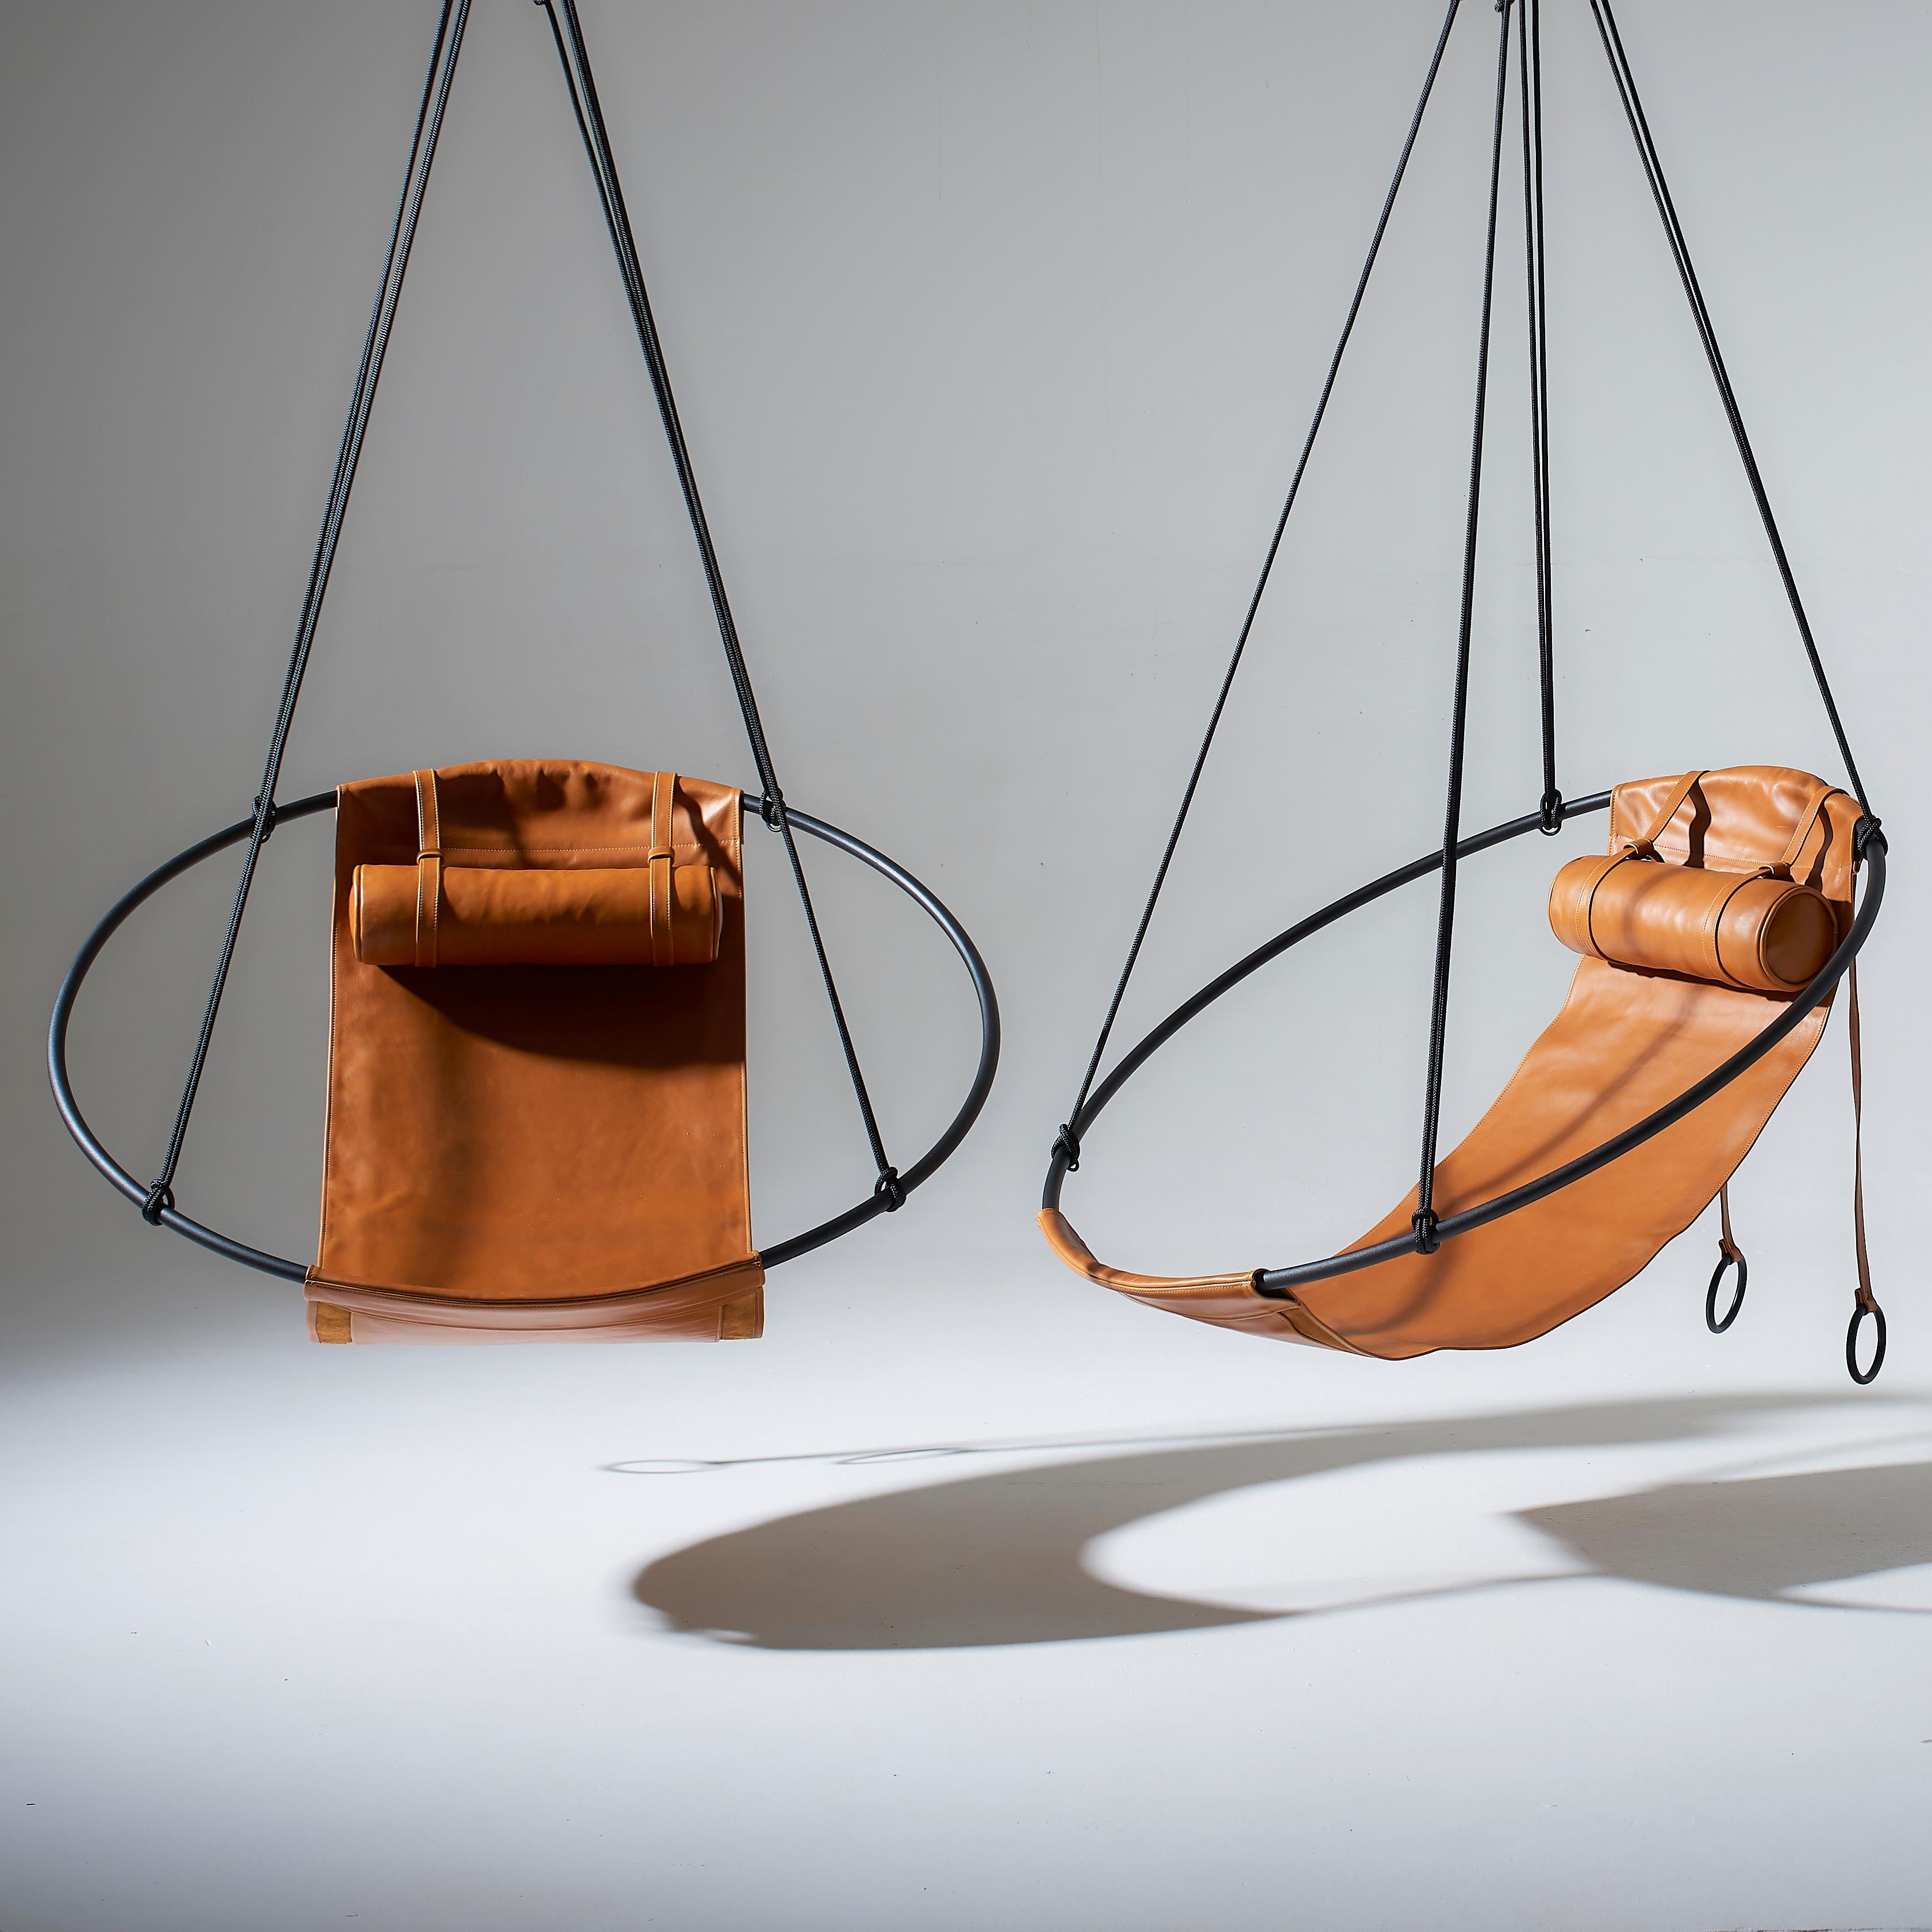 Stripped away from all excess, this hanging chair has a circular frame with the sheets of soft leather hanging loose within it, to create a sleek, sexy, and oh so comfortable experience. This chair’s clean lines and lightness makes it a perfect fit